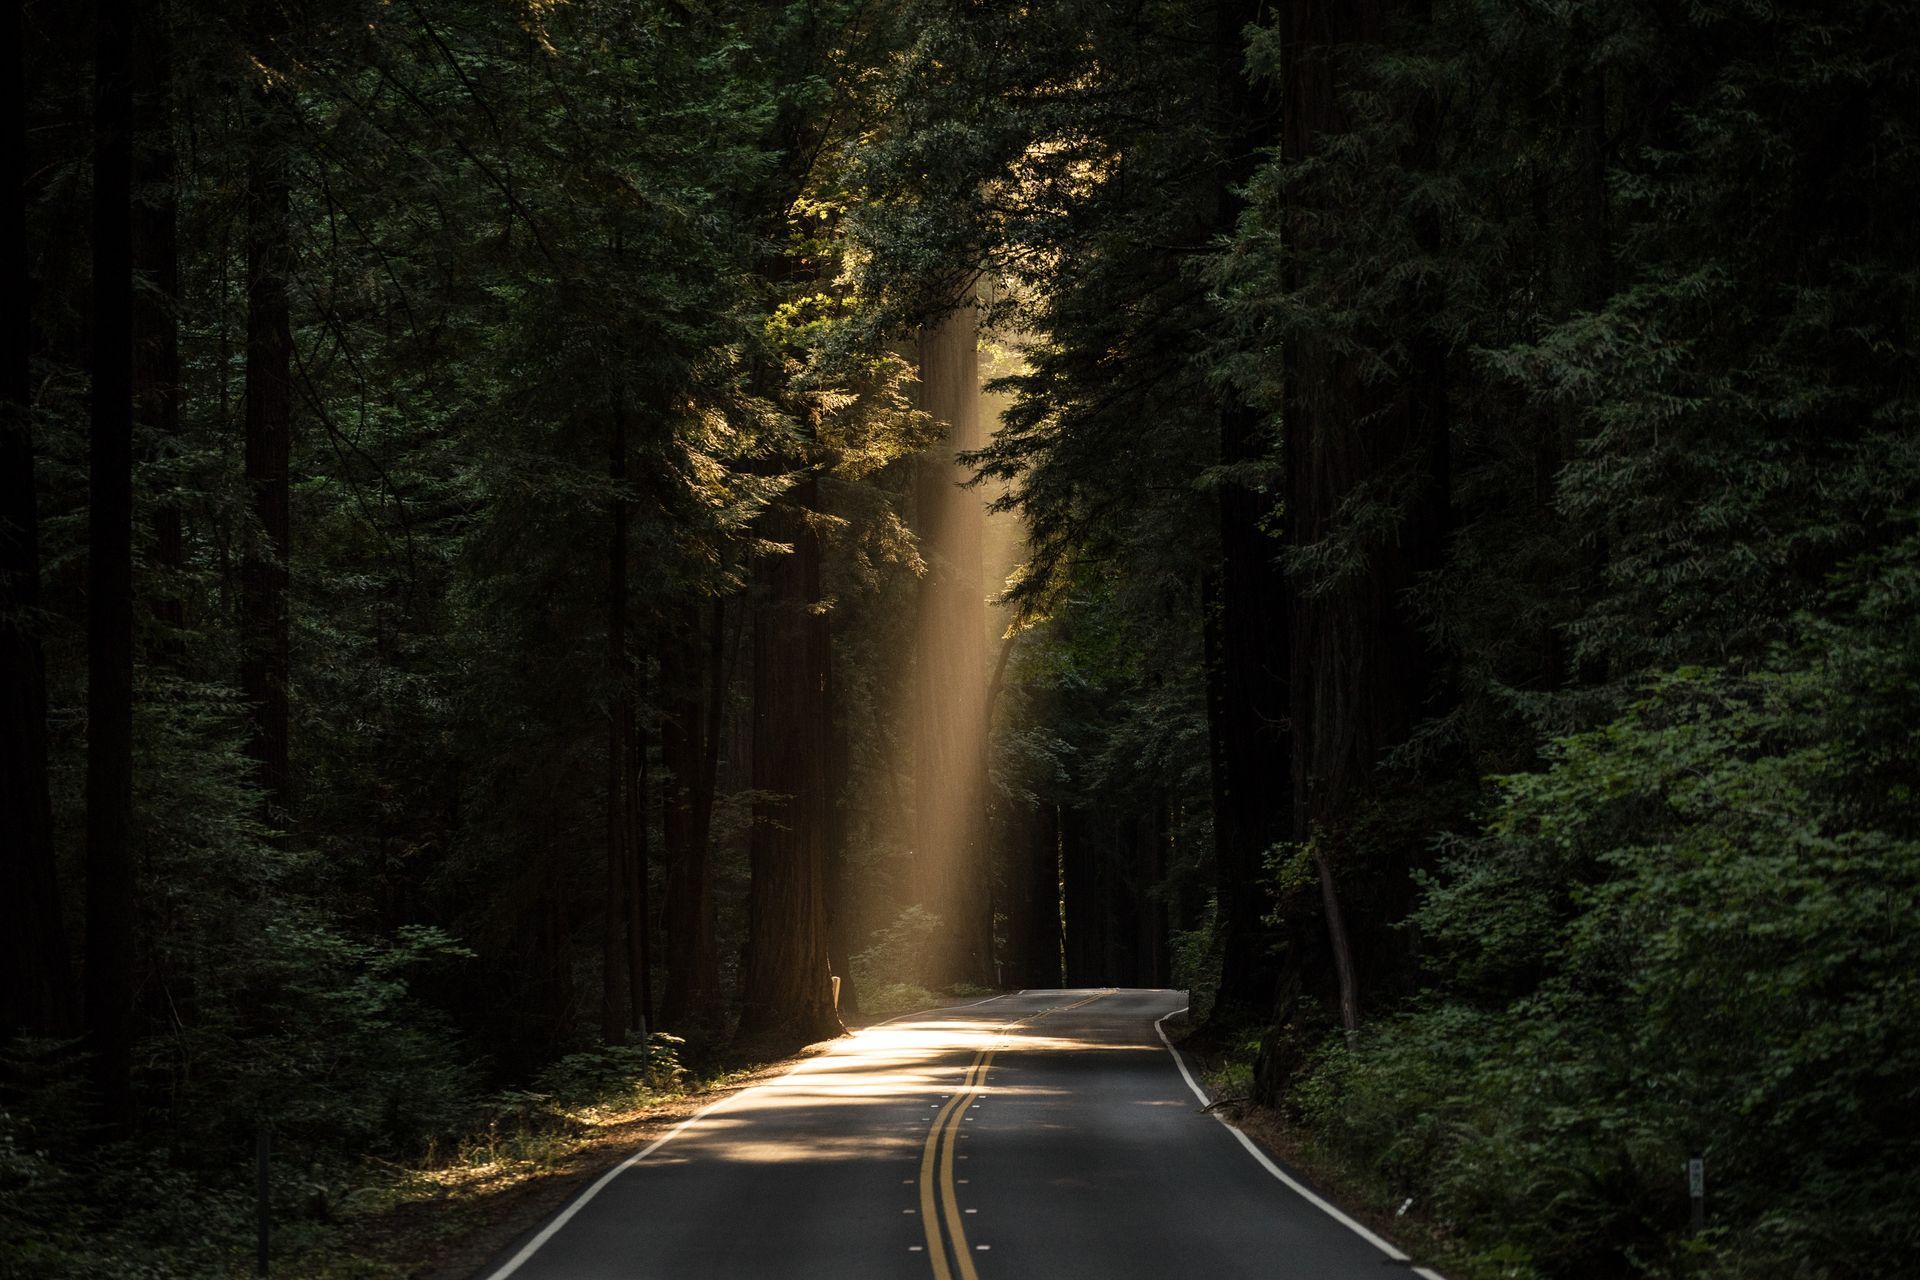 light shining through the trees onto a windy road